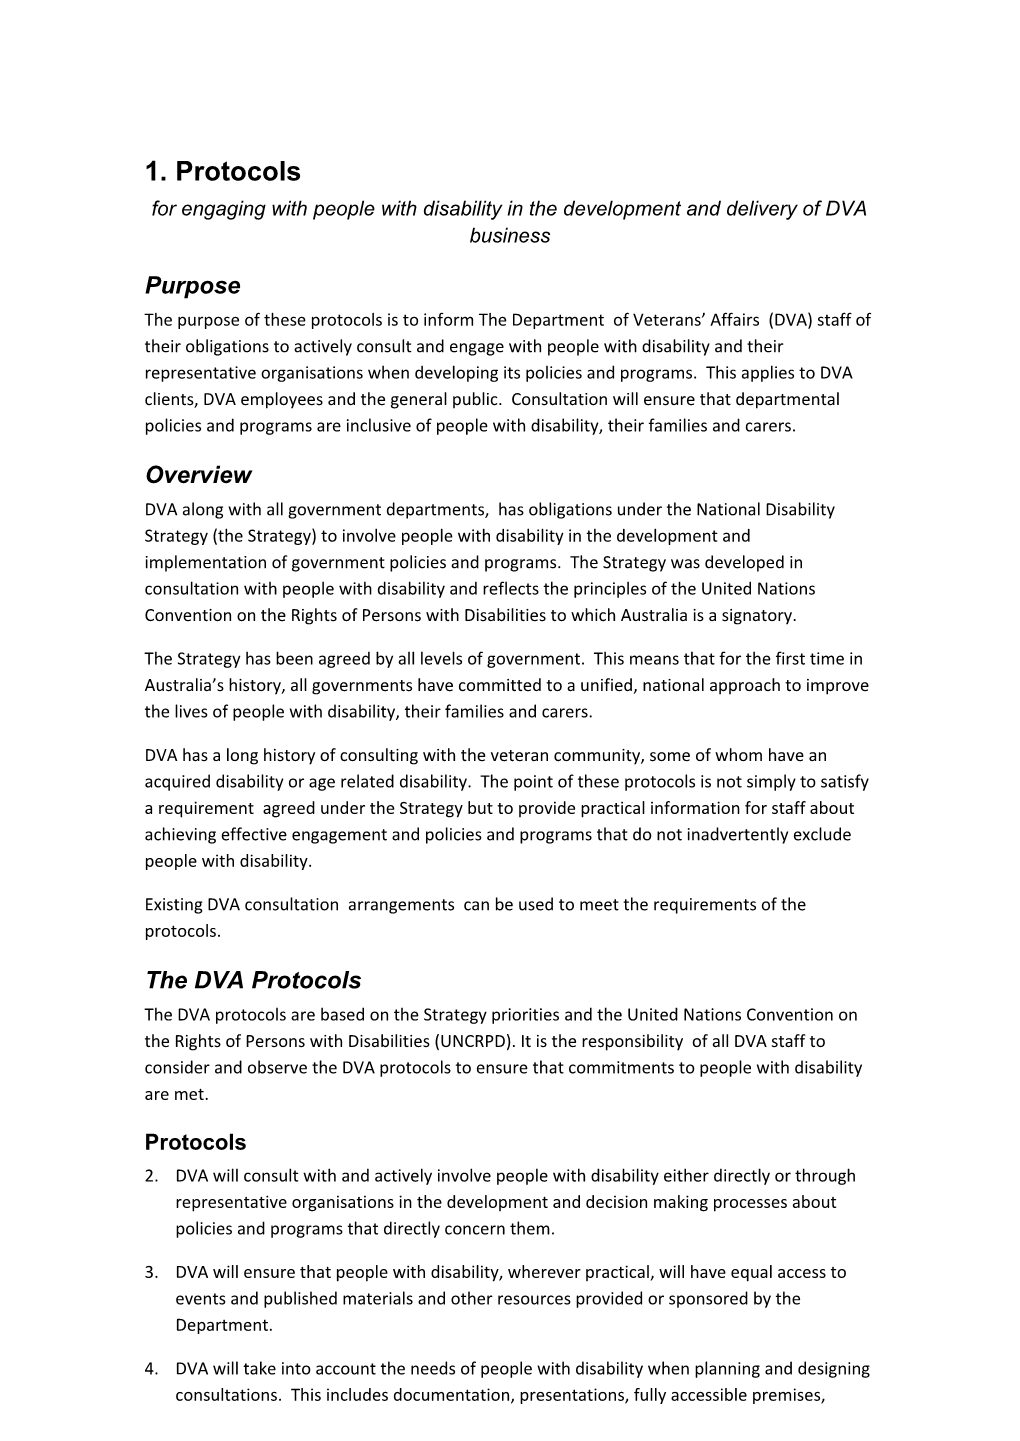 Protocols for Engaging with People with Disability in the Development and Delivery of DVA